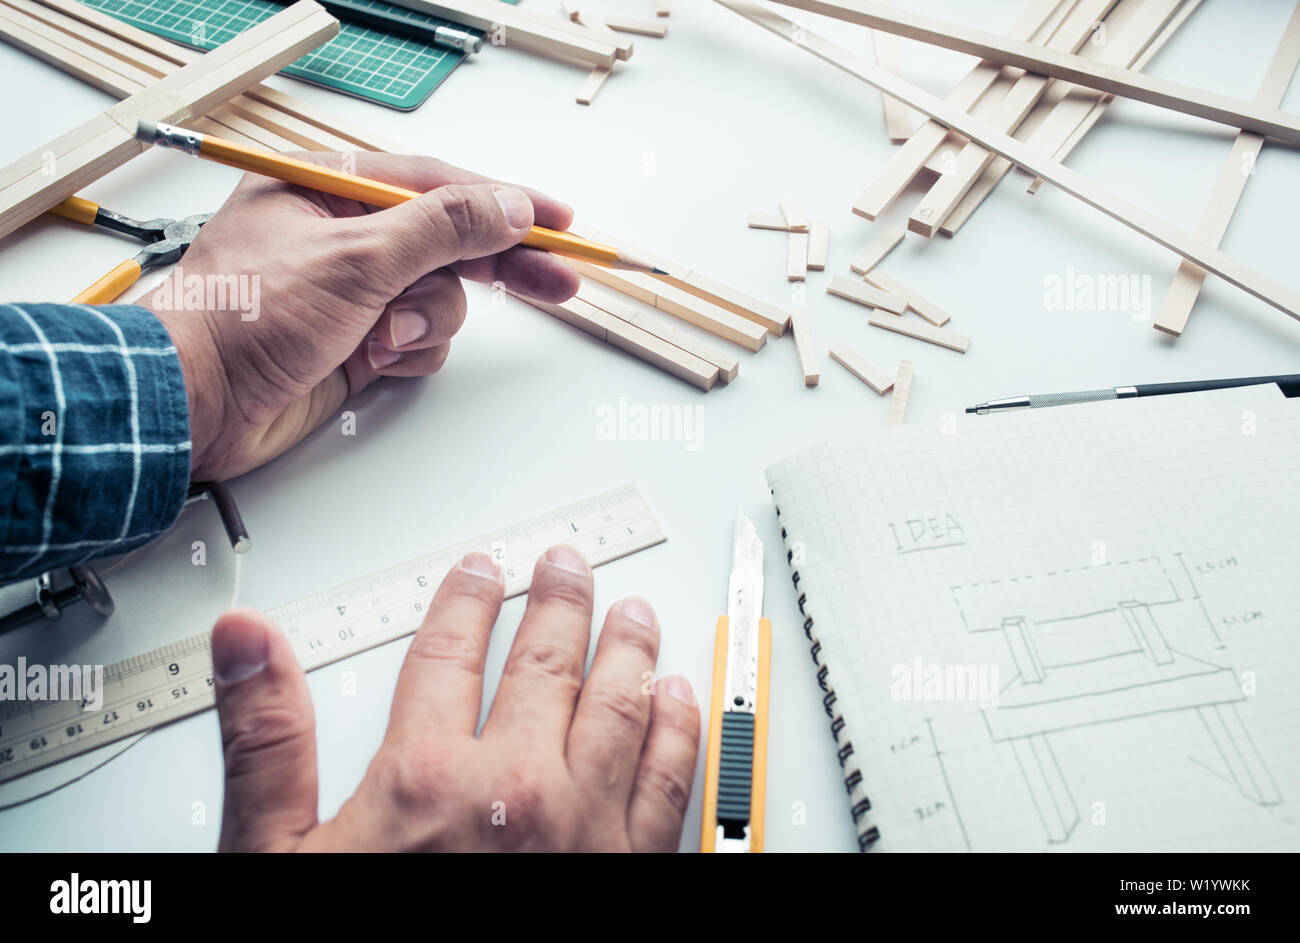 Male working on worktable with balsa wood material.Diy,design project,invention concept ideas Stock Photo